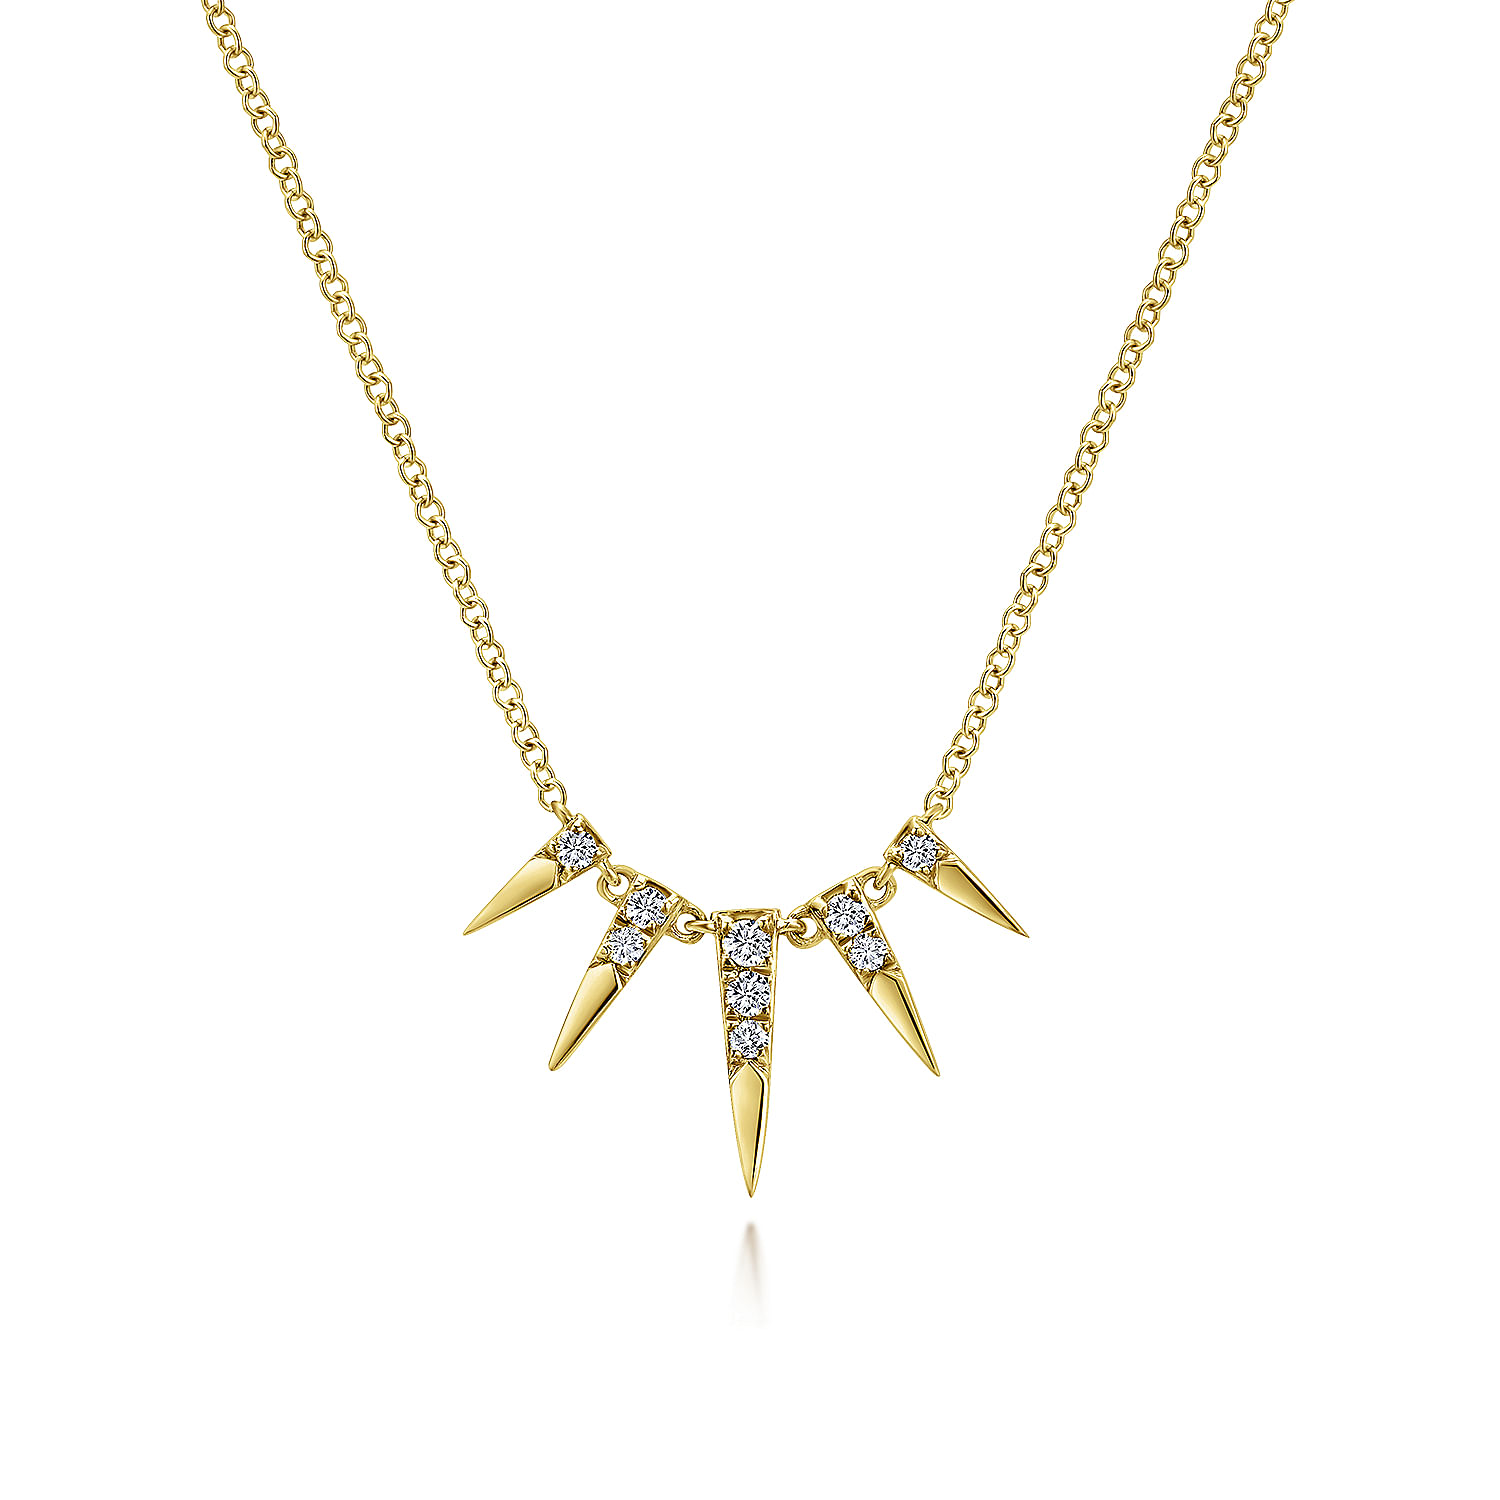 14K Yellow Gold Edgy Spikes Diamond Necklace